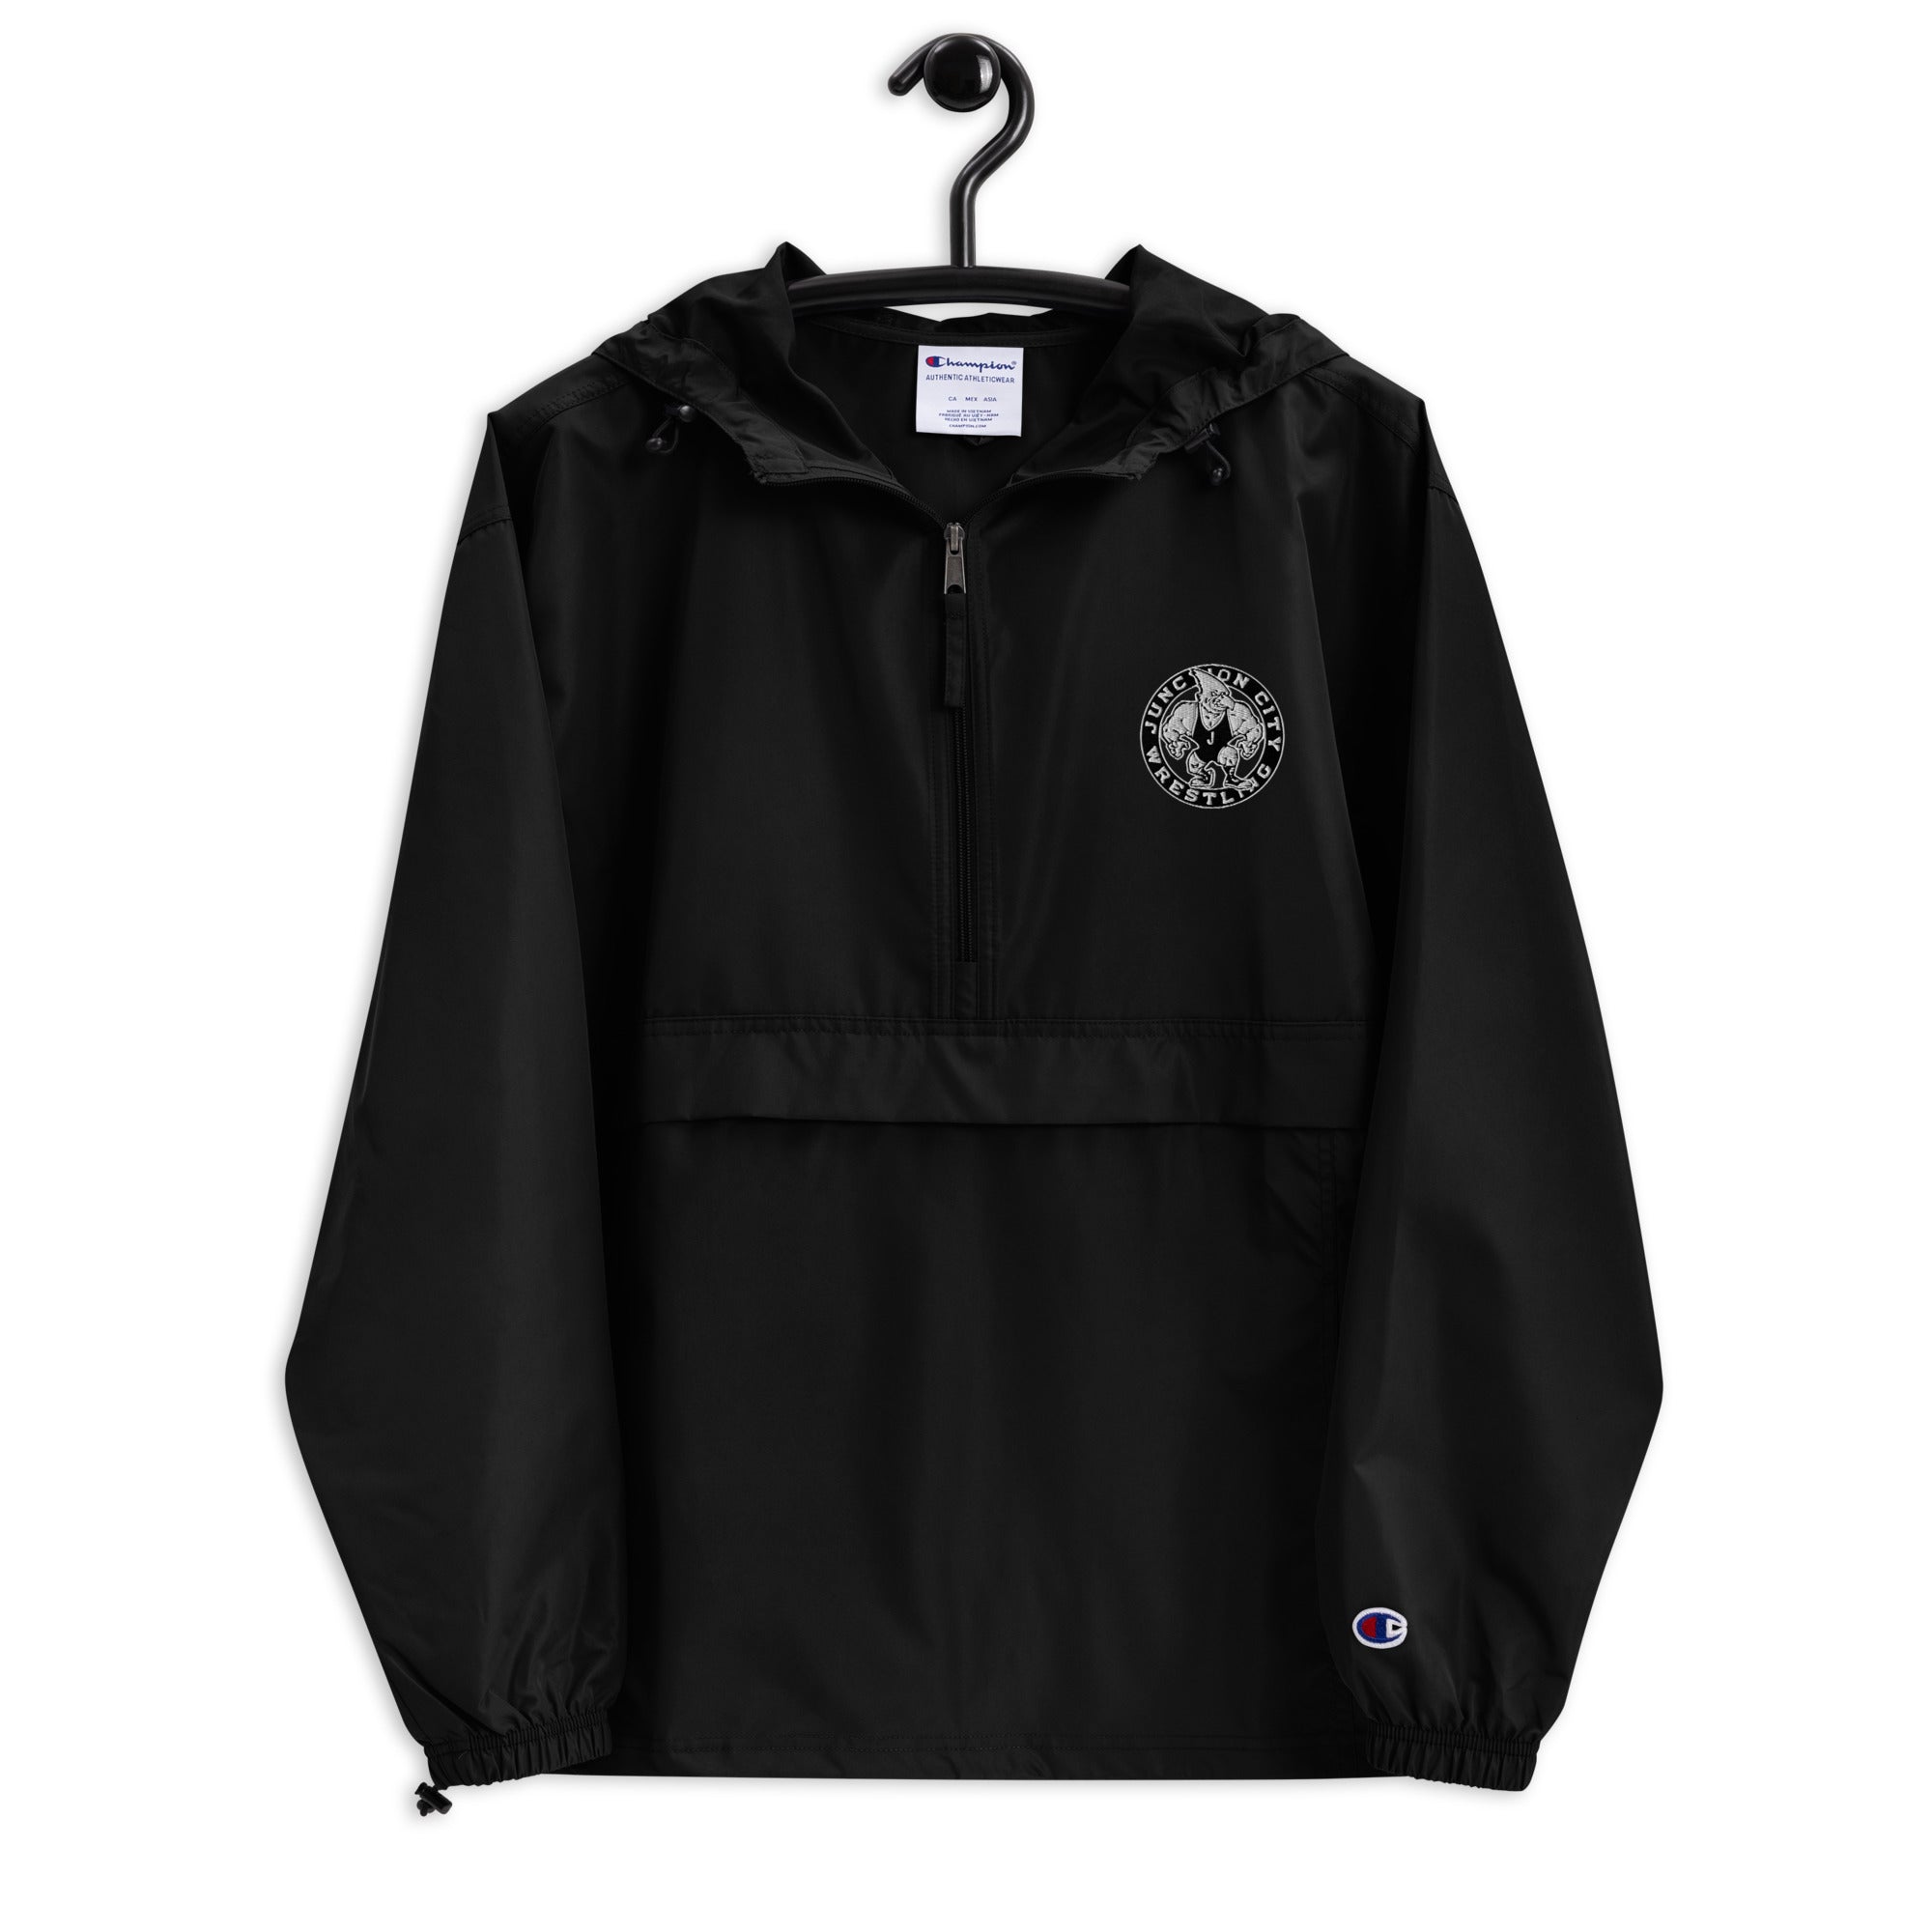 Junction City Embroidered Champion Packable Jacket